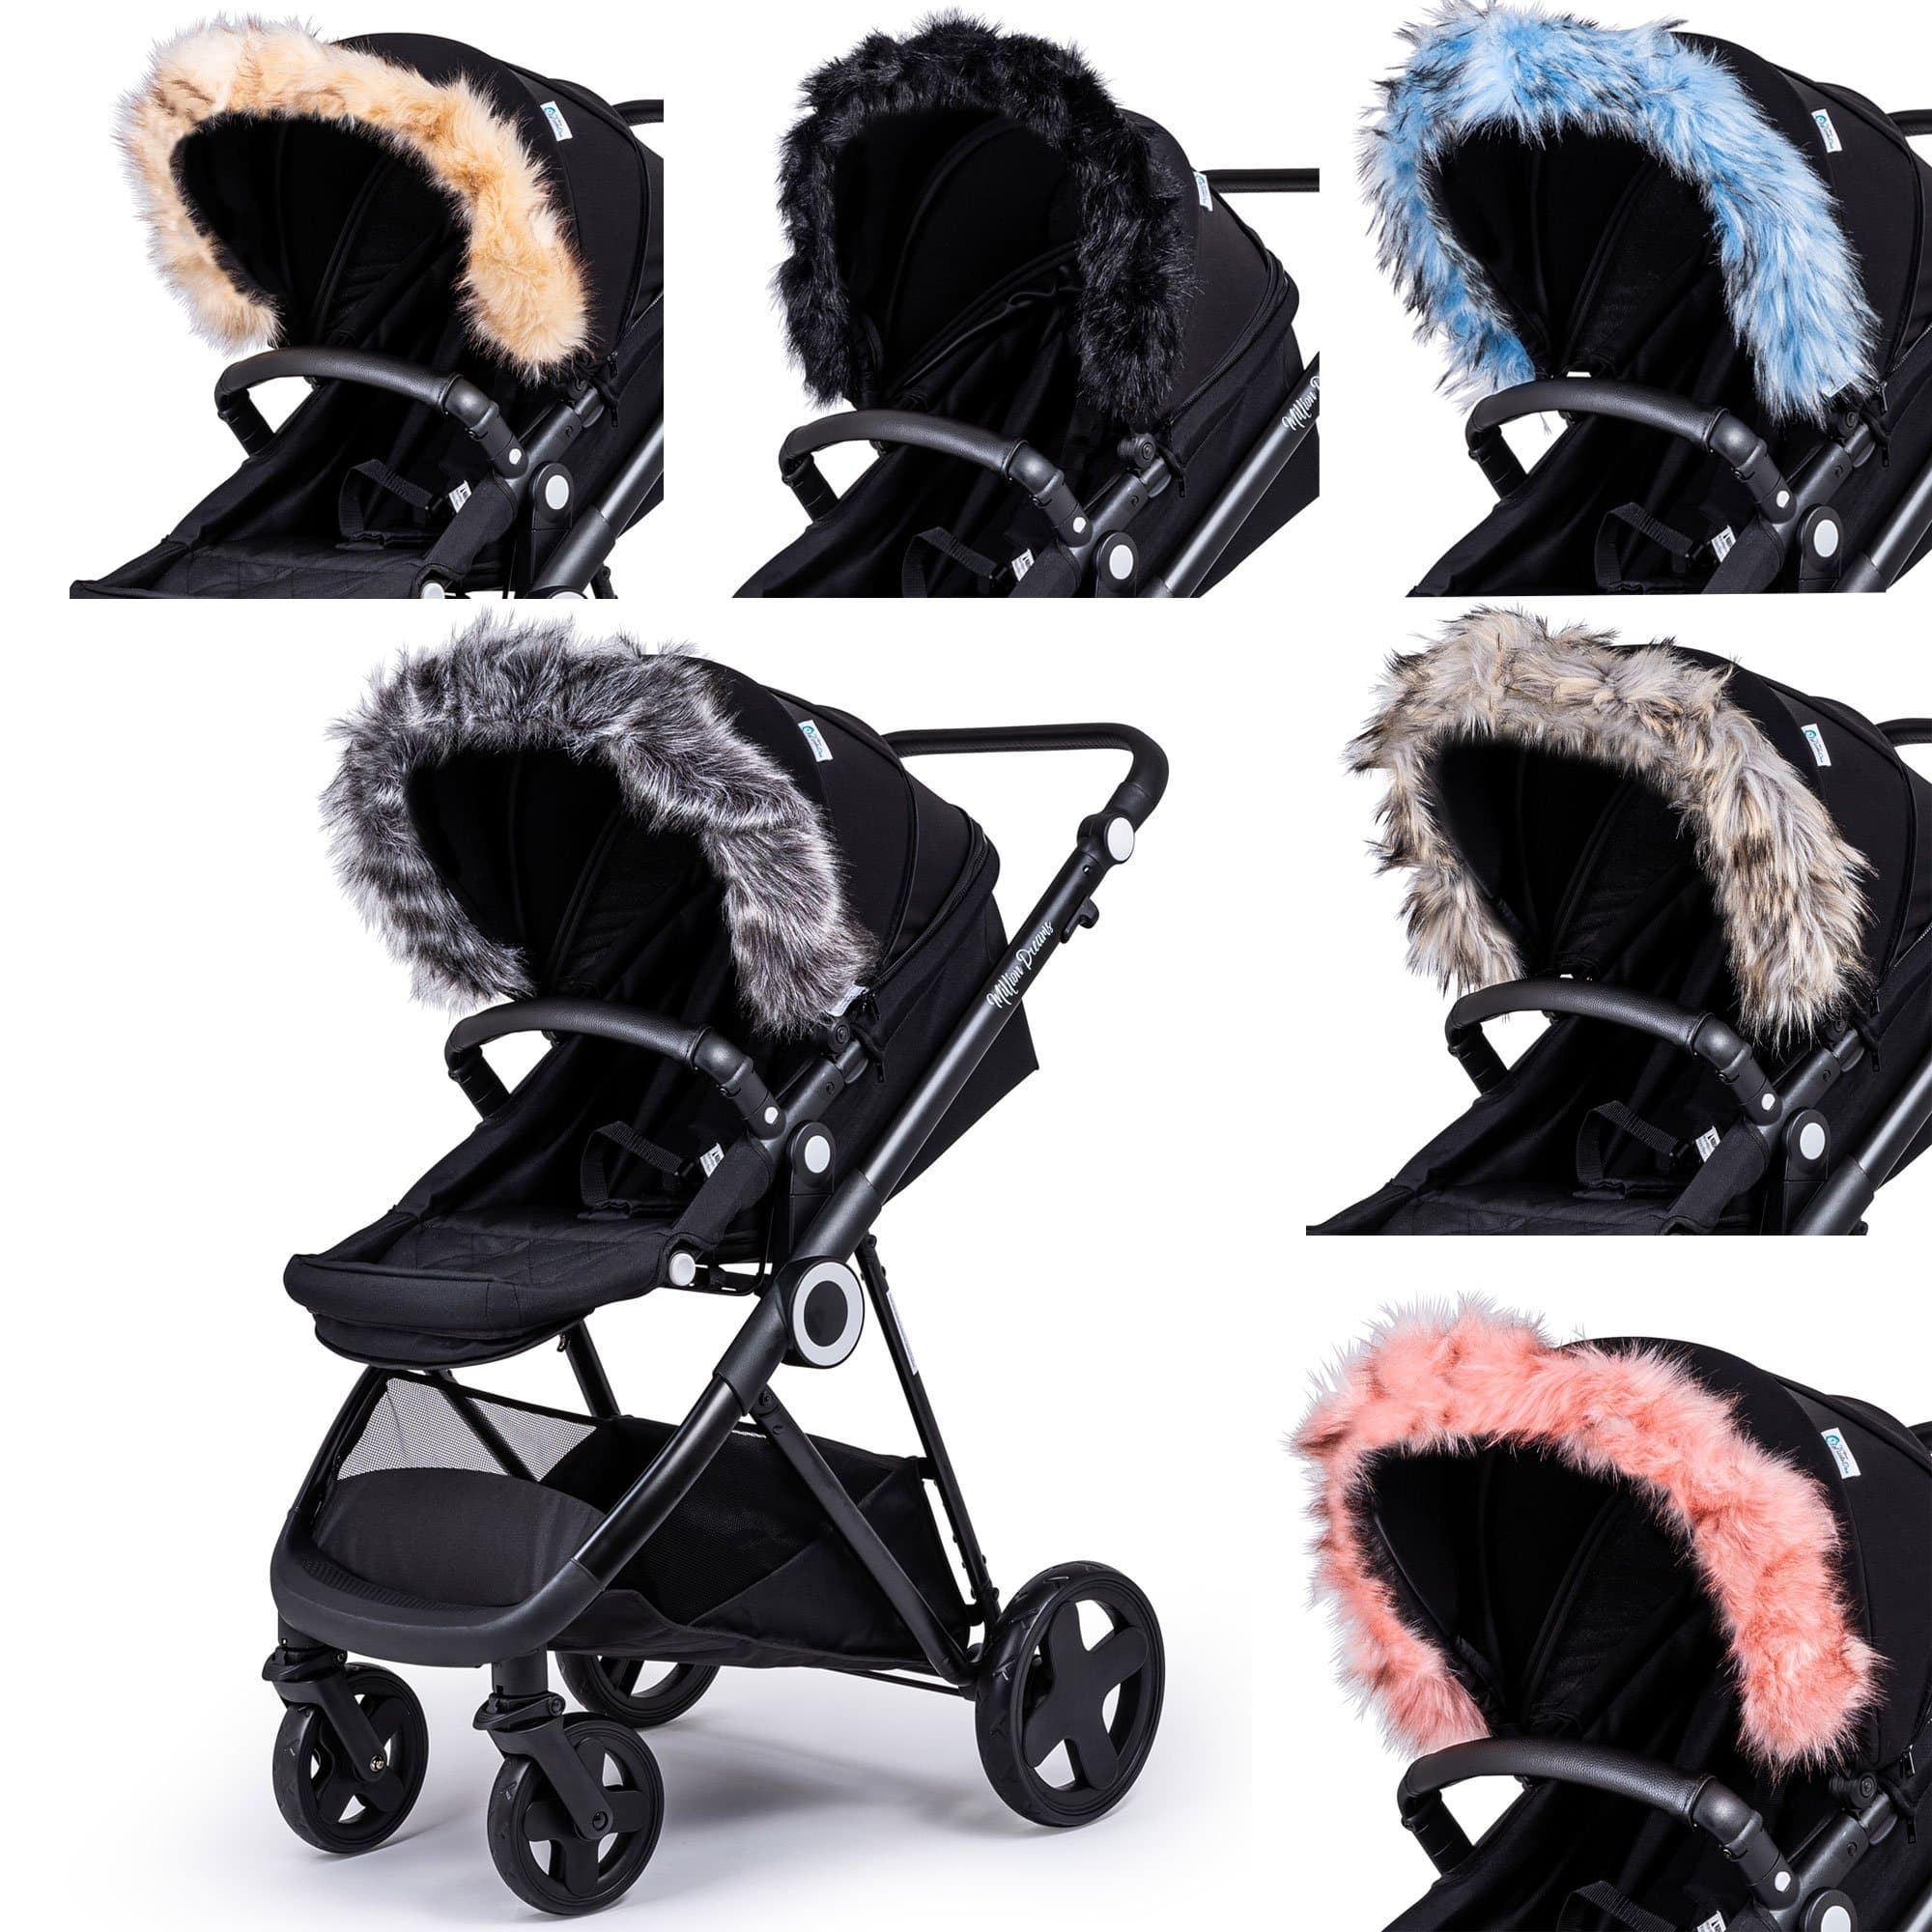 Pram Fur Hood Trim Attachment for Pushchair Compatible with Mamas & Papas - For Your Little One